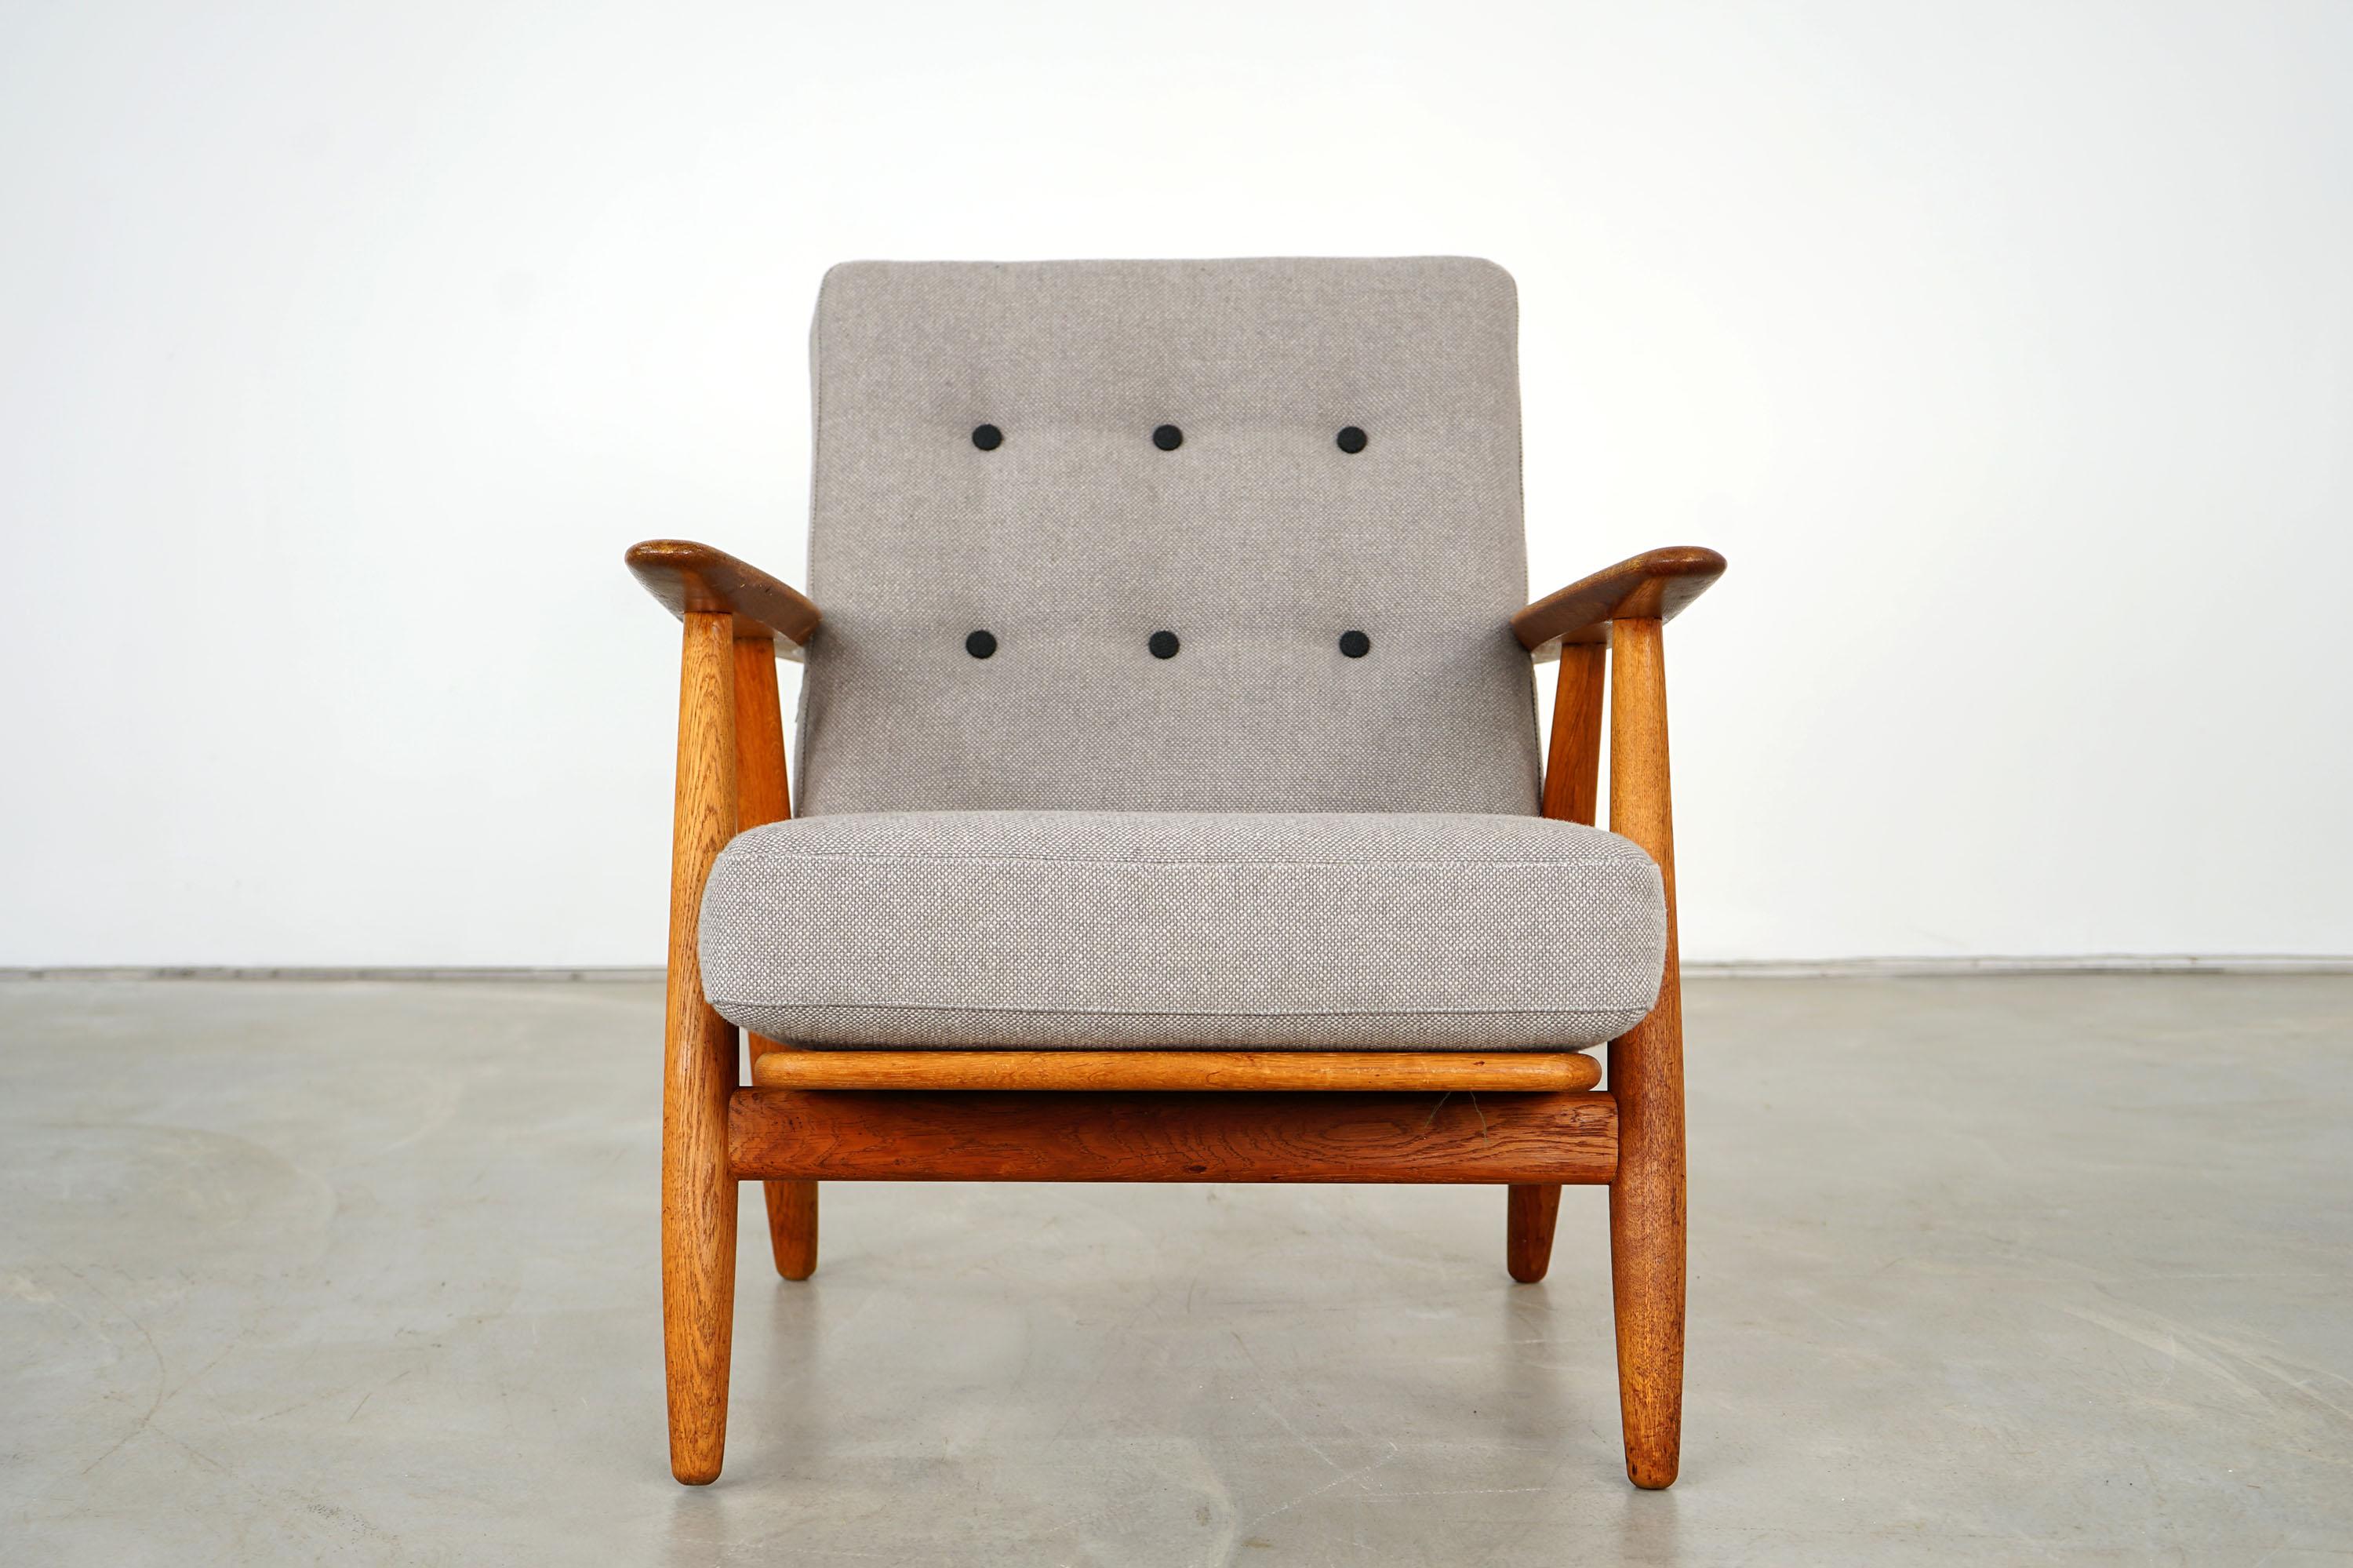 This cigar armchair GE240 was designed by Hans Wegner for the manufacturer GETAMA. The piece is from the 1950s. It is made of oak. The pillows were reupholstered and covered with the high-quality fabric Hallingdal by Kvdrat. The piece of furniture